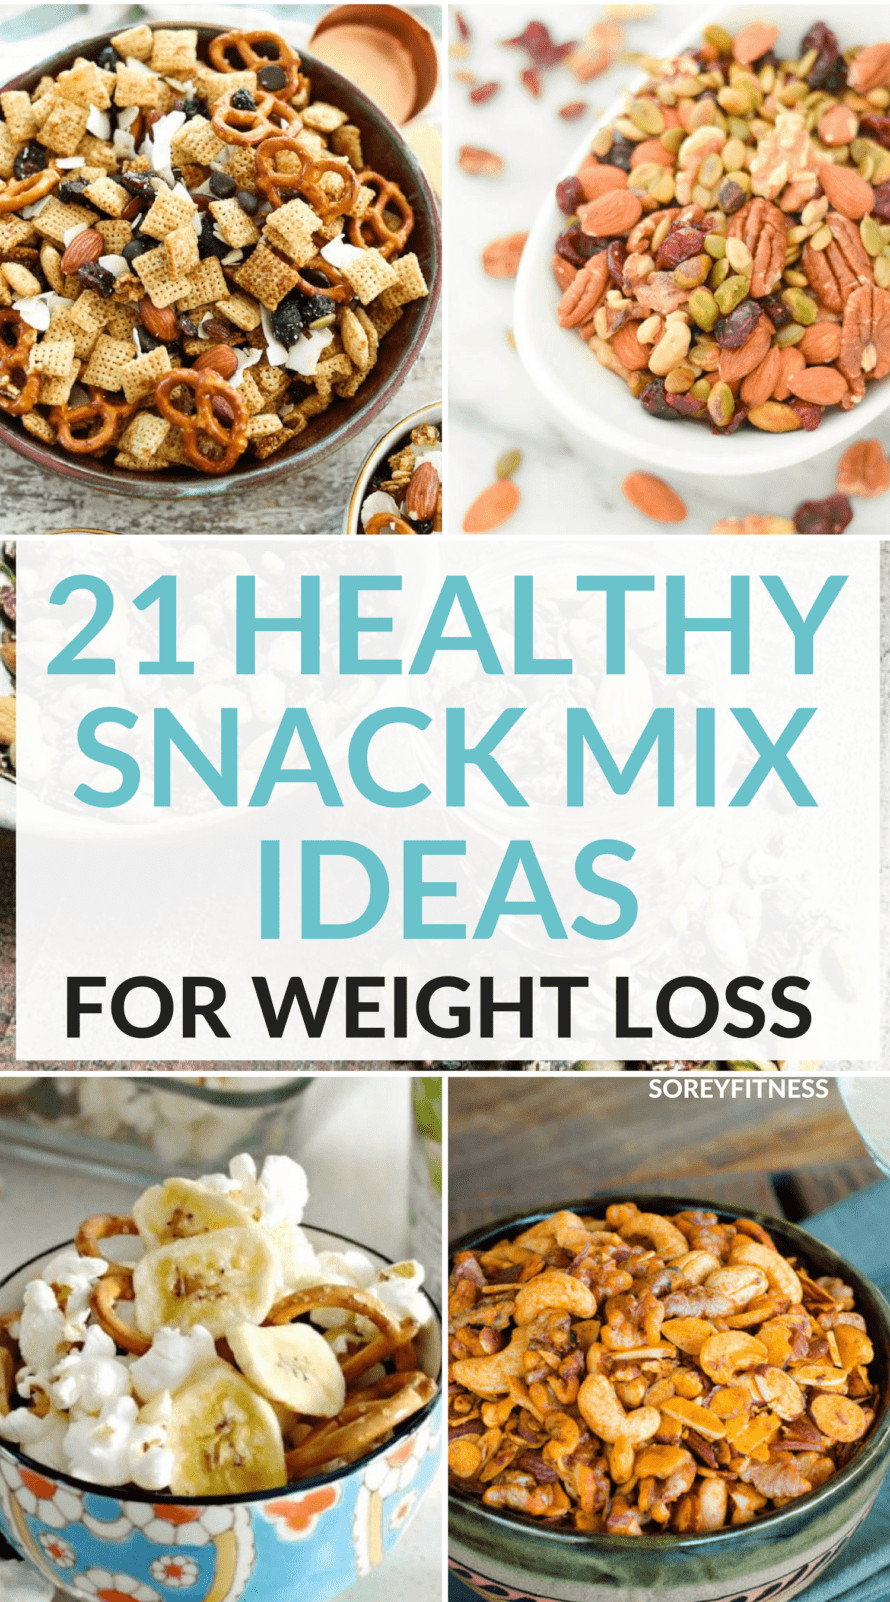 Snacks That Are Healthy
 21 Healthy Snack Mix Recipes For Weight Loss Your Family